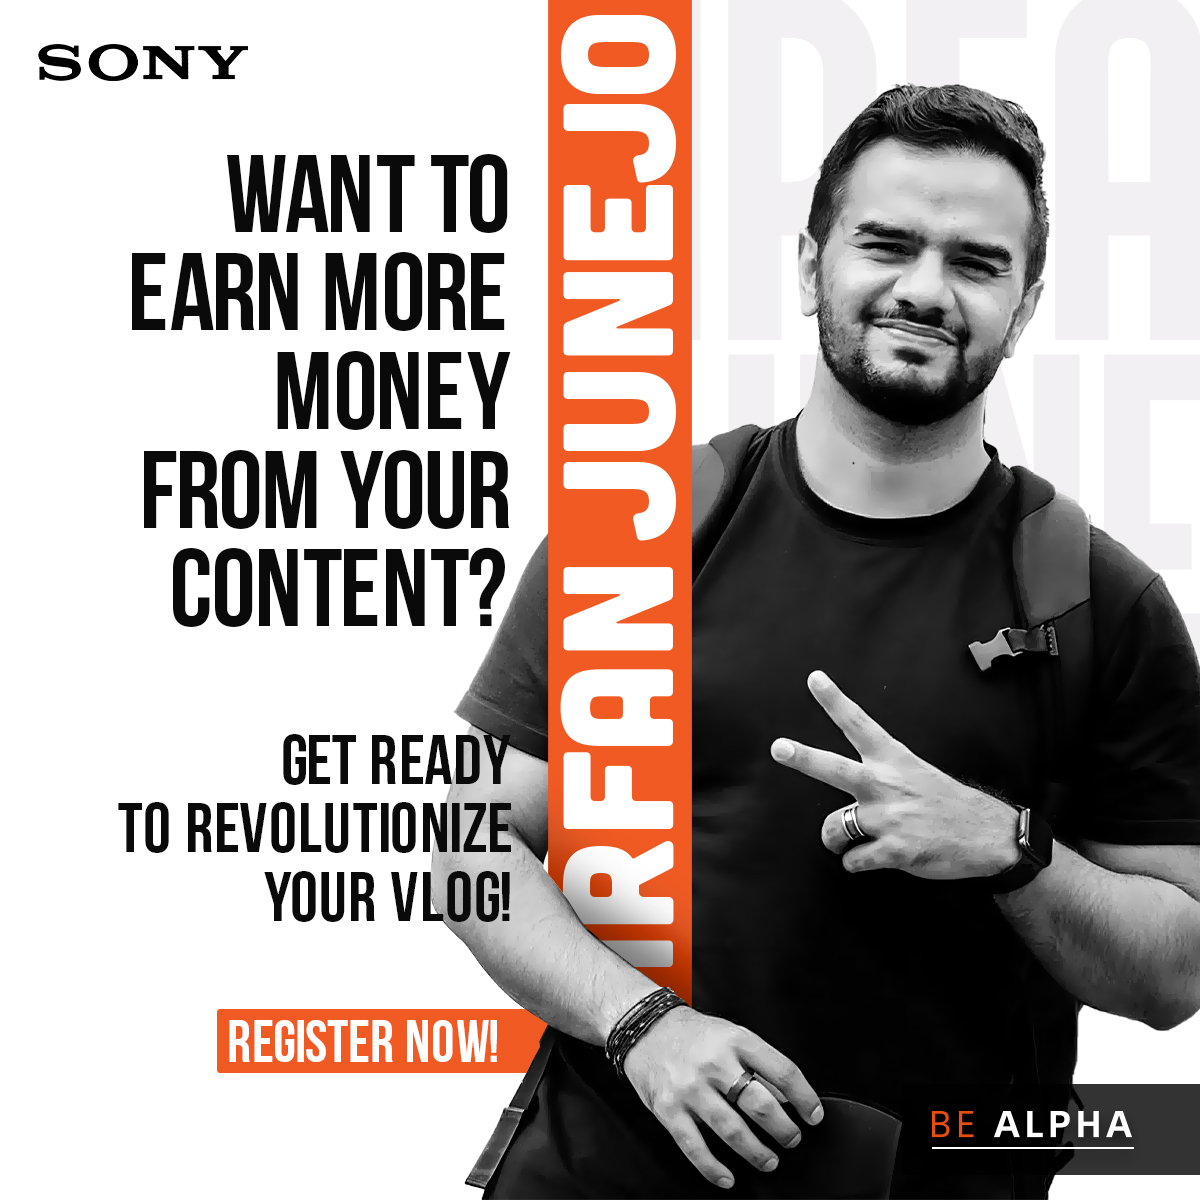 Want to earn more money from your Content? Get ready to revolutionize your vlog! Register now! 👉 Free Register here to get the answer: alphauniverse-mea.com/event/irfan-ju… #SonyMea #BeAlpha #Photography #Videography #IrfanJunejo #contentcreator #contentcreationtips